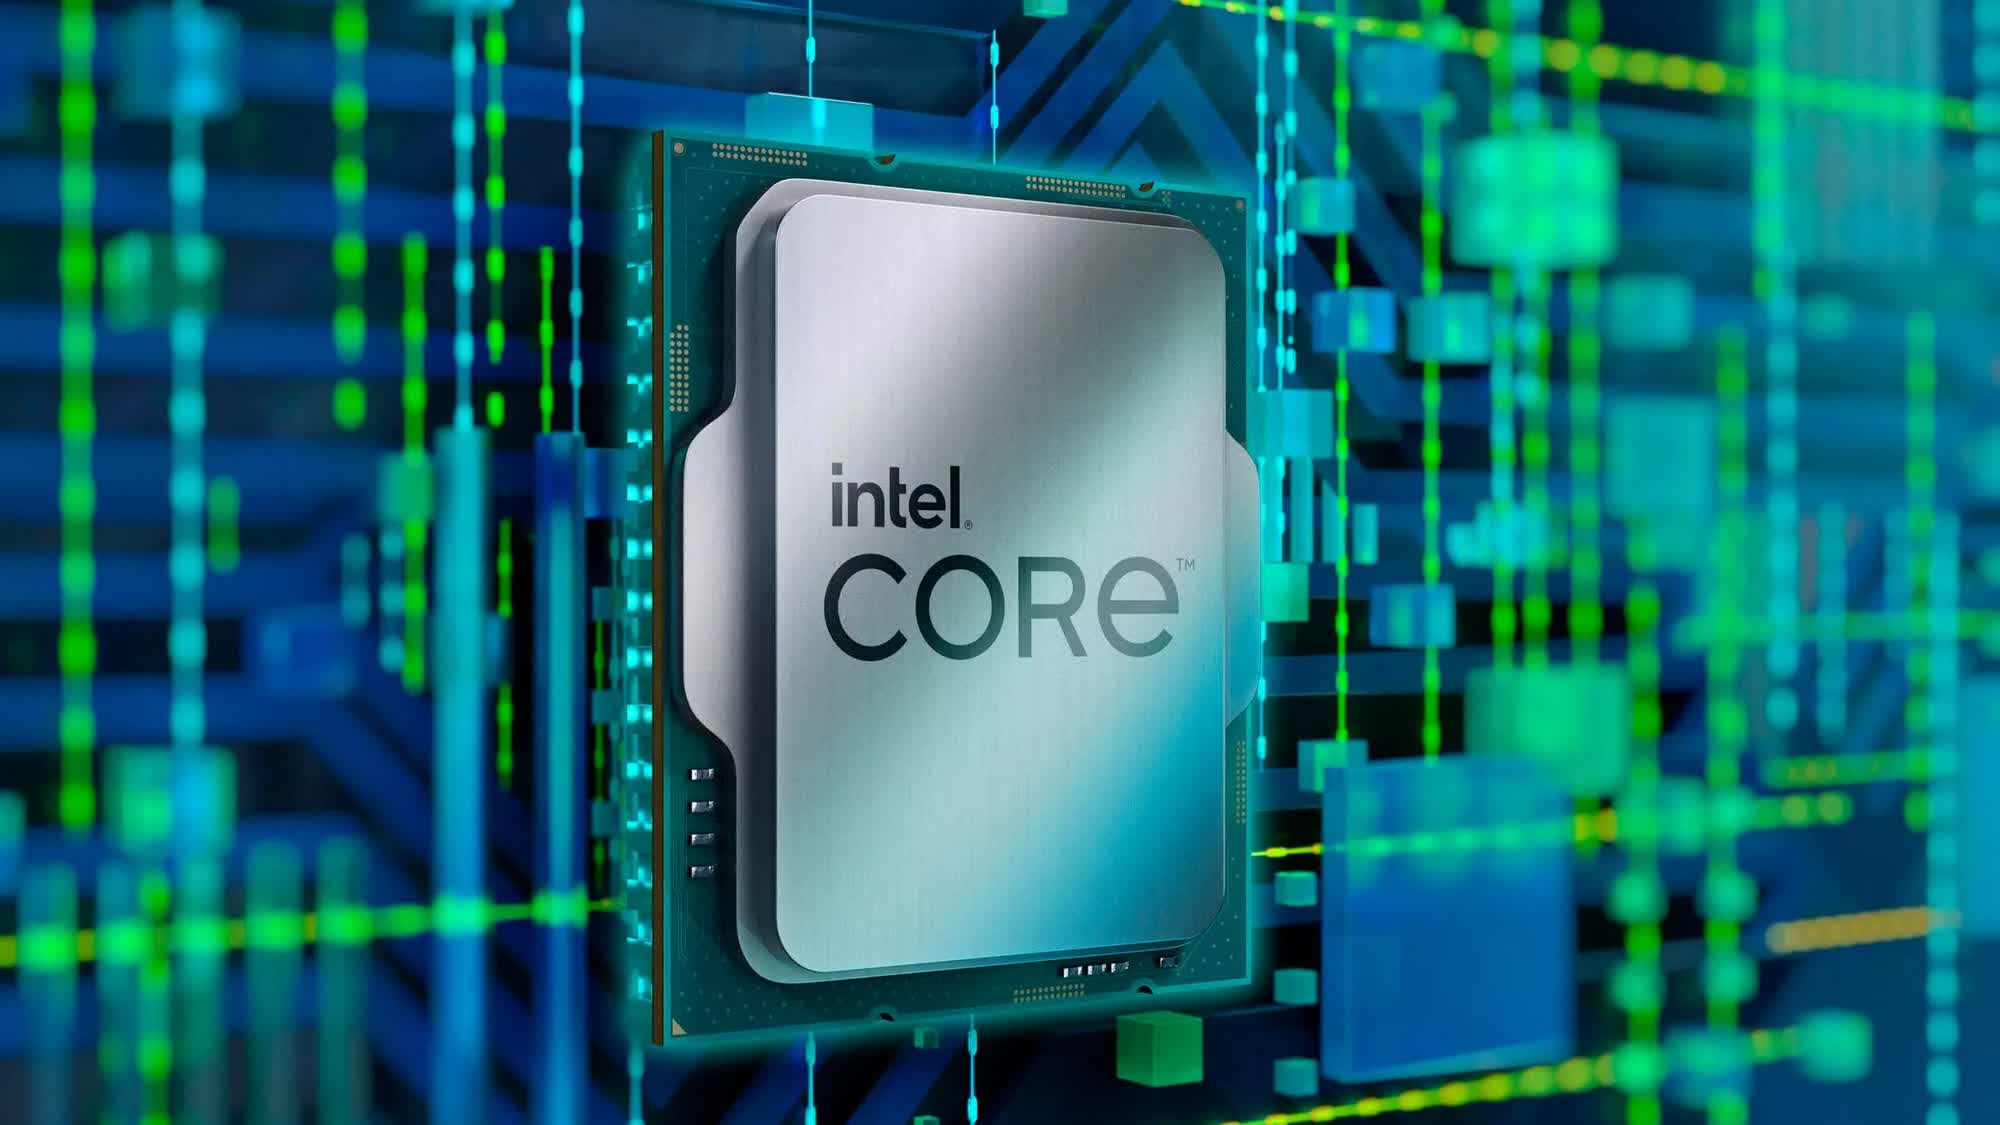 Intel's Arrow Lake-S desktop CPUs could ditch Hyper-Threading after more than two decades